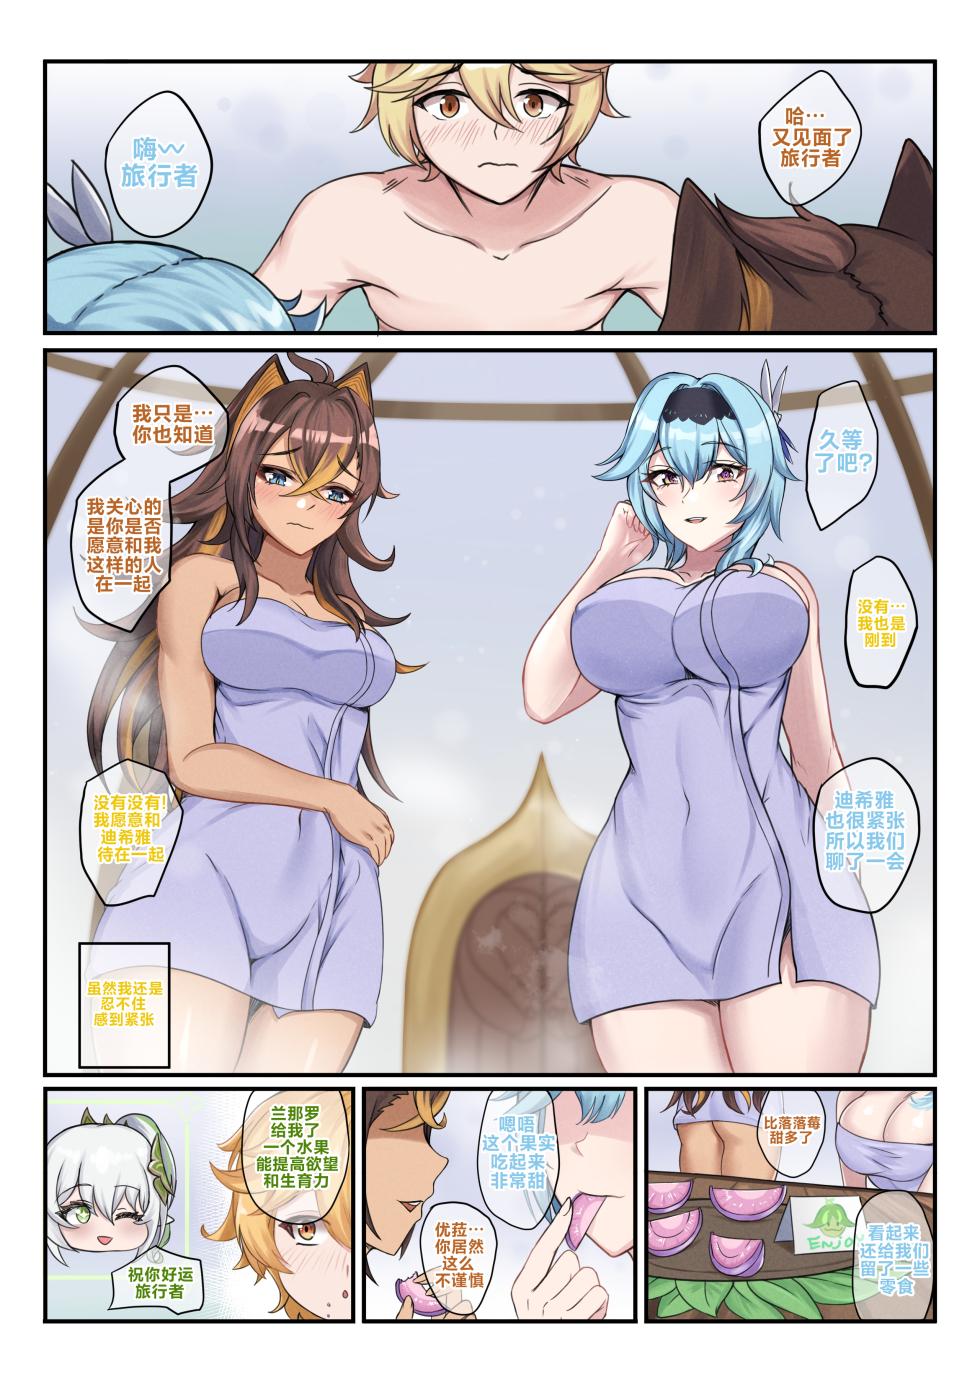 [BruLee] Hot and Cold Sunyata (Genshin Impact) [Chinese] [黎欧出资汉化] - Page 3